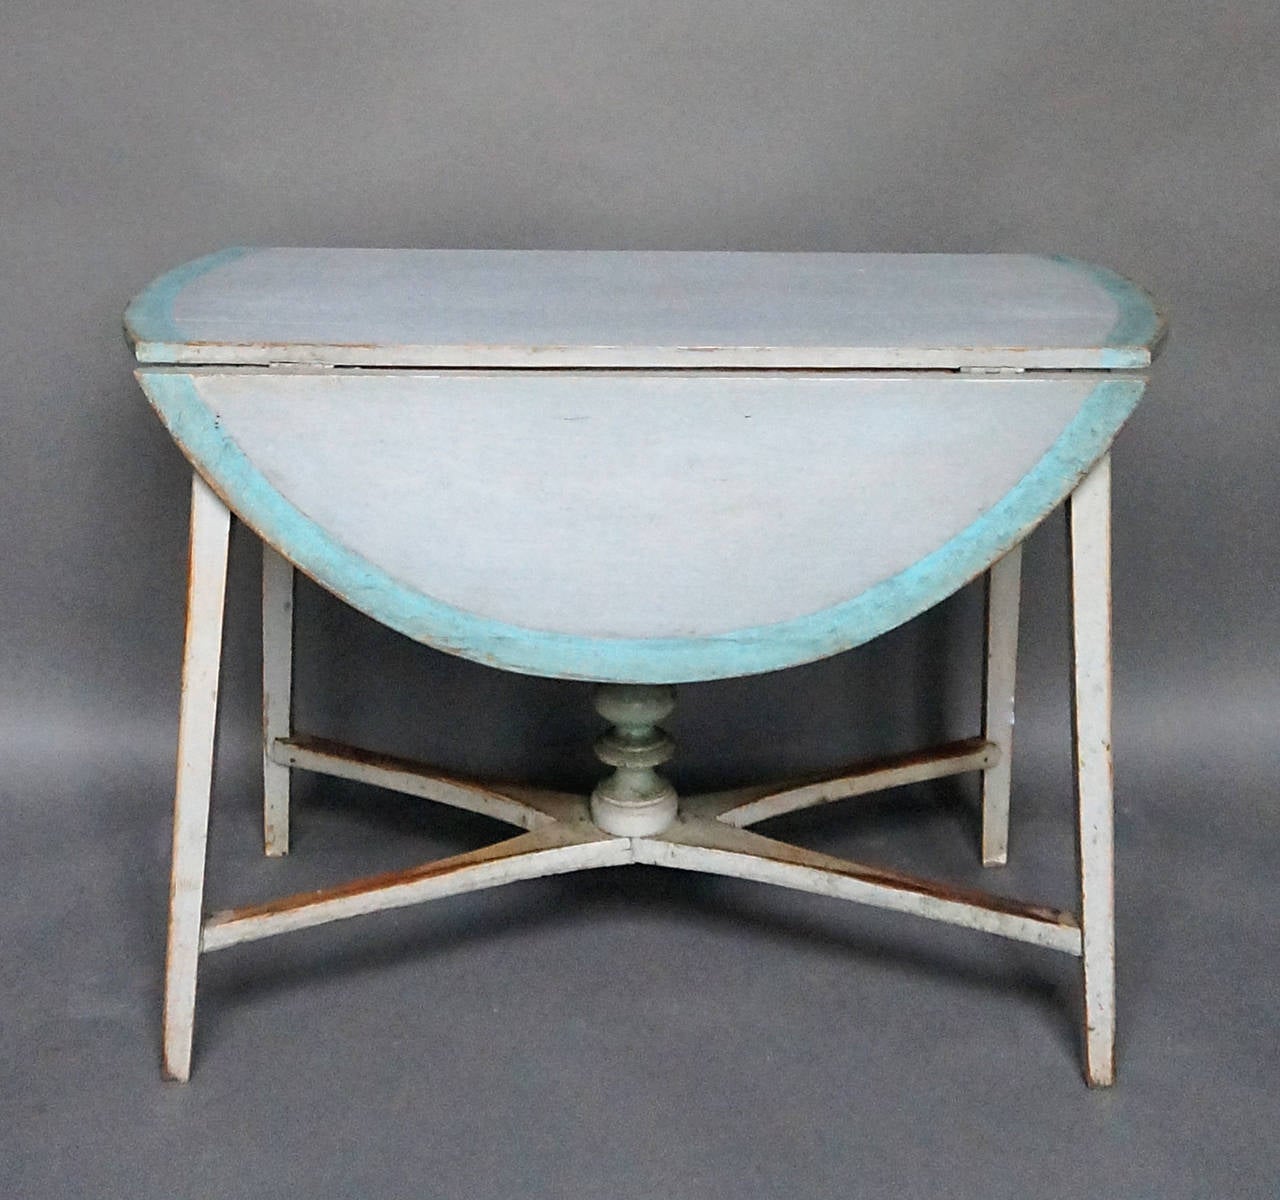 Swedish drop-leaf table, circa 1820, with a saltire stretcher with bold central finial. Original paint with charming detail.